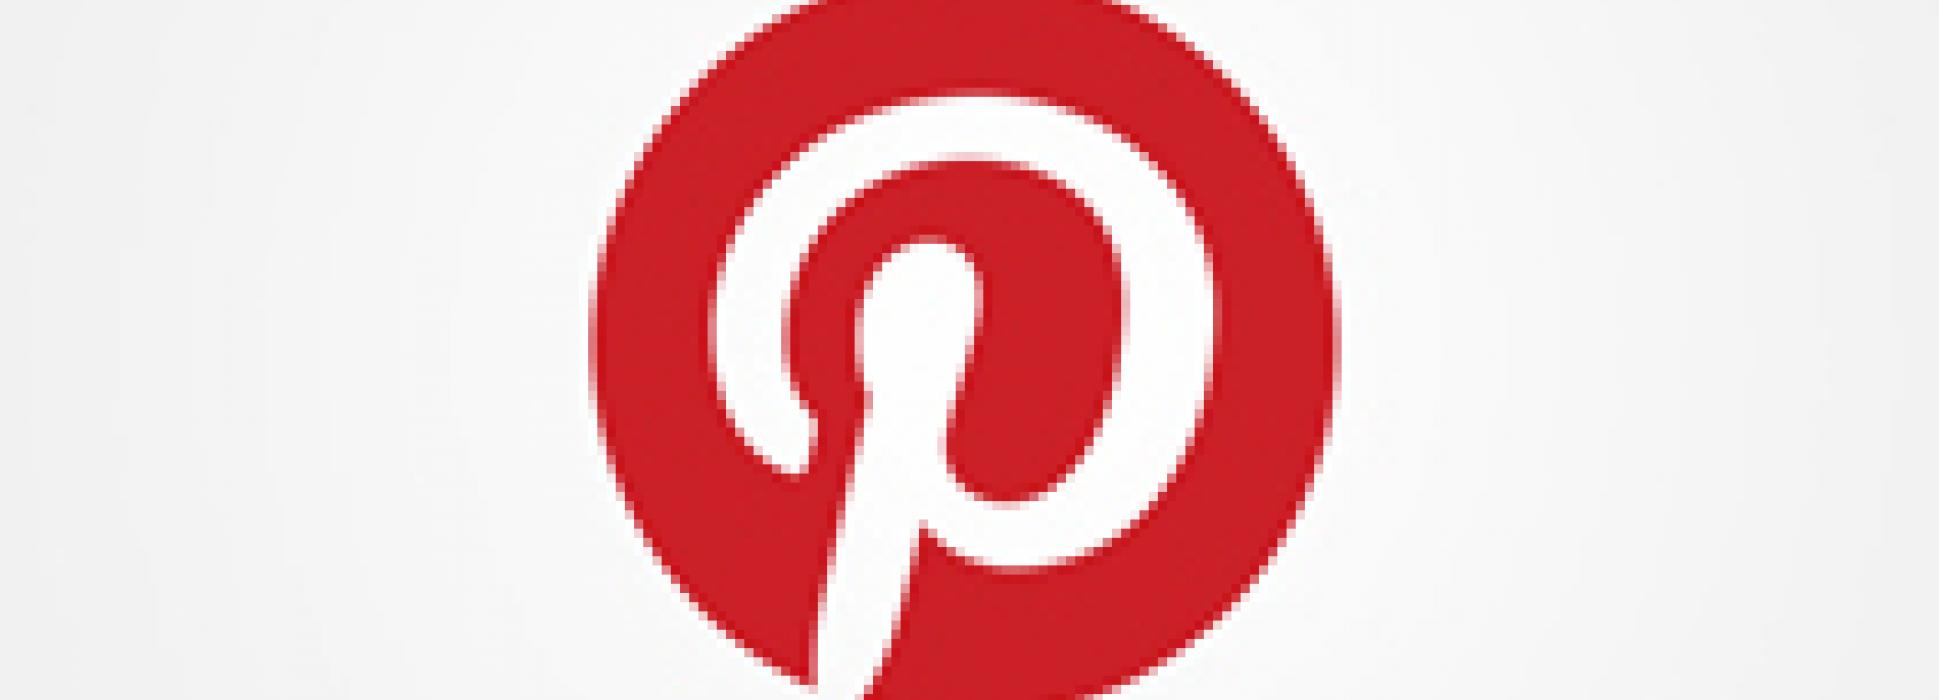 See you again on Pinterest!